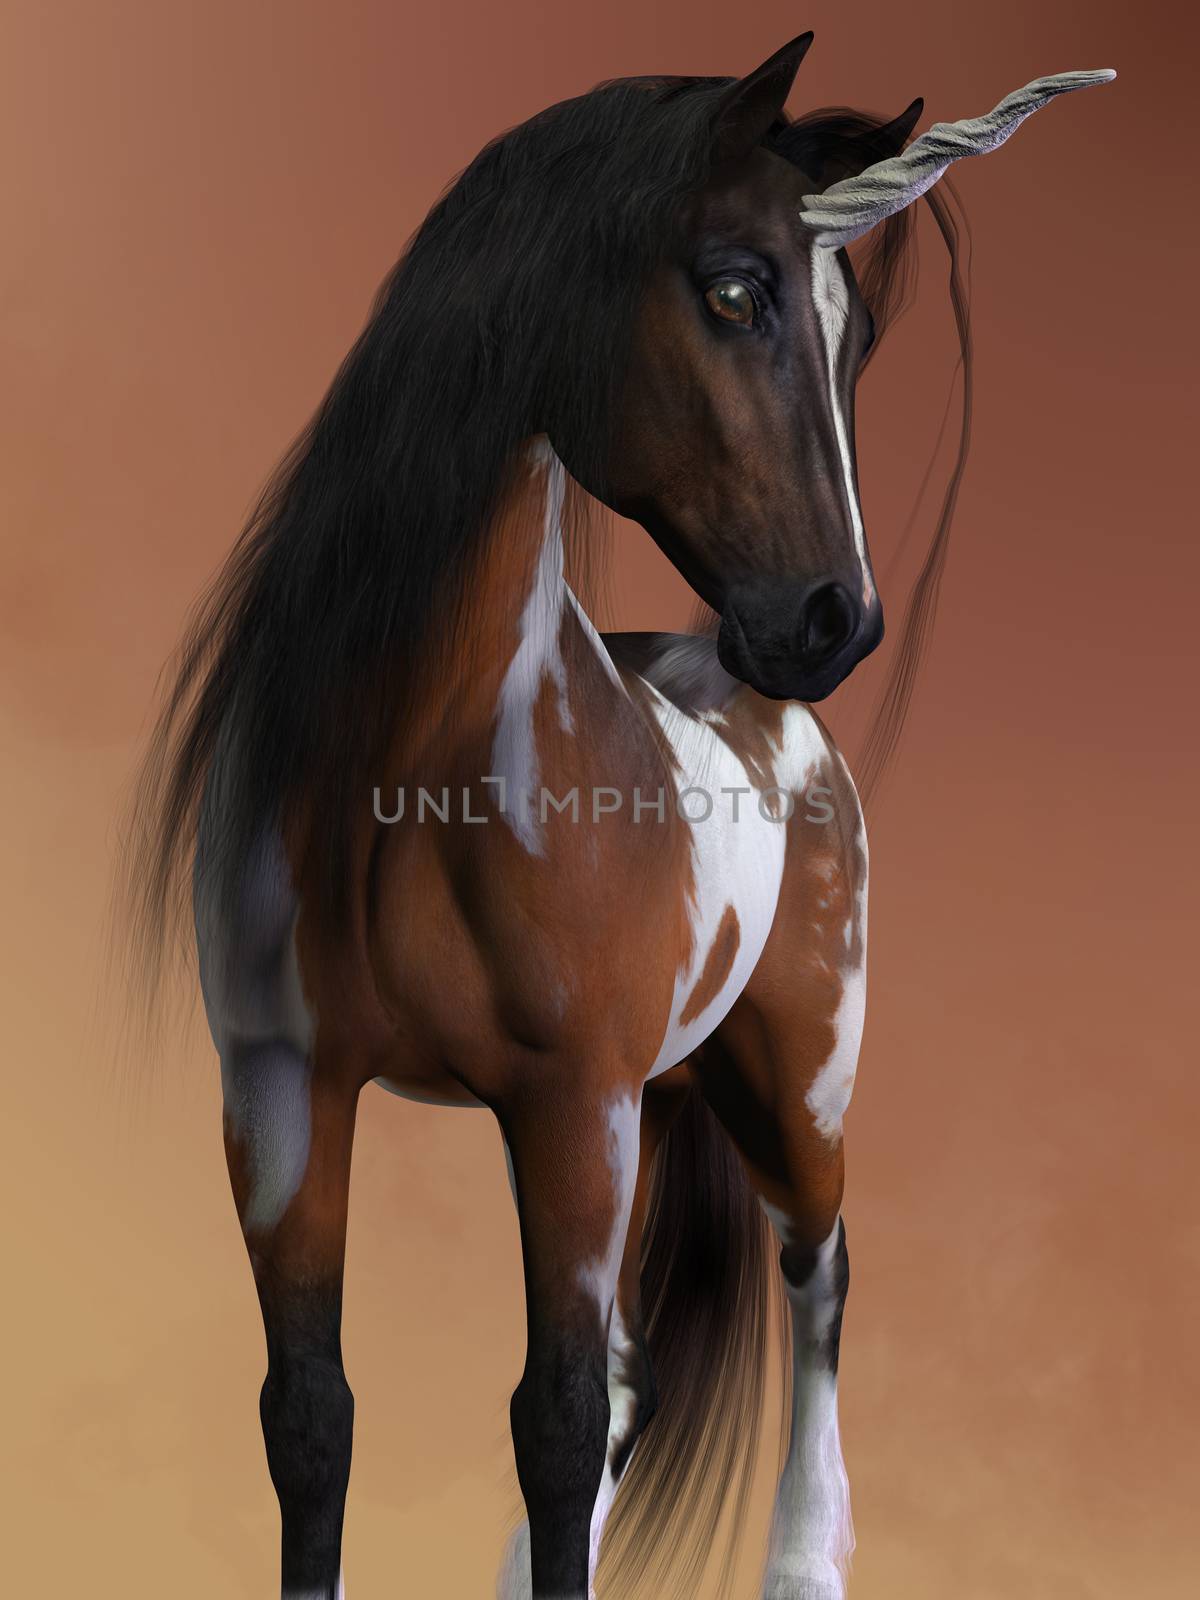 A bay pinto unicorn has the small body and fine features of the Arabian horse breed.